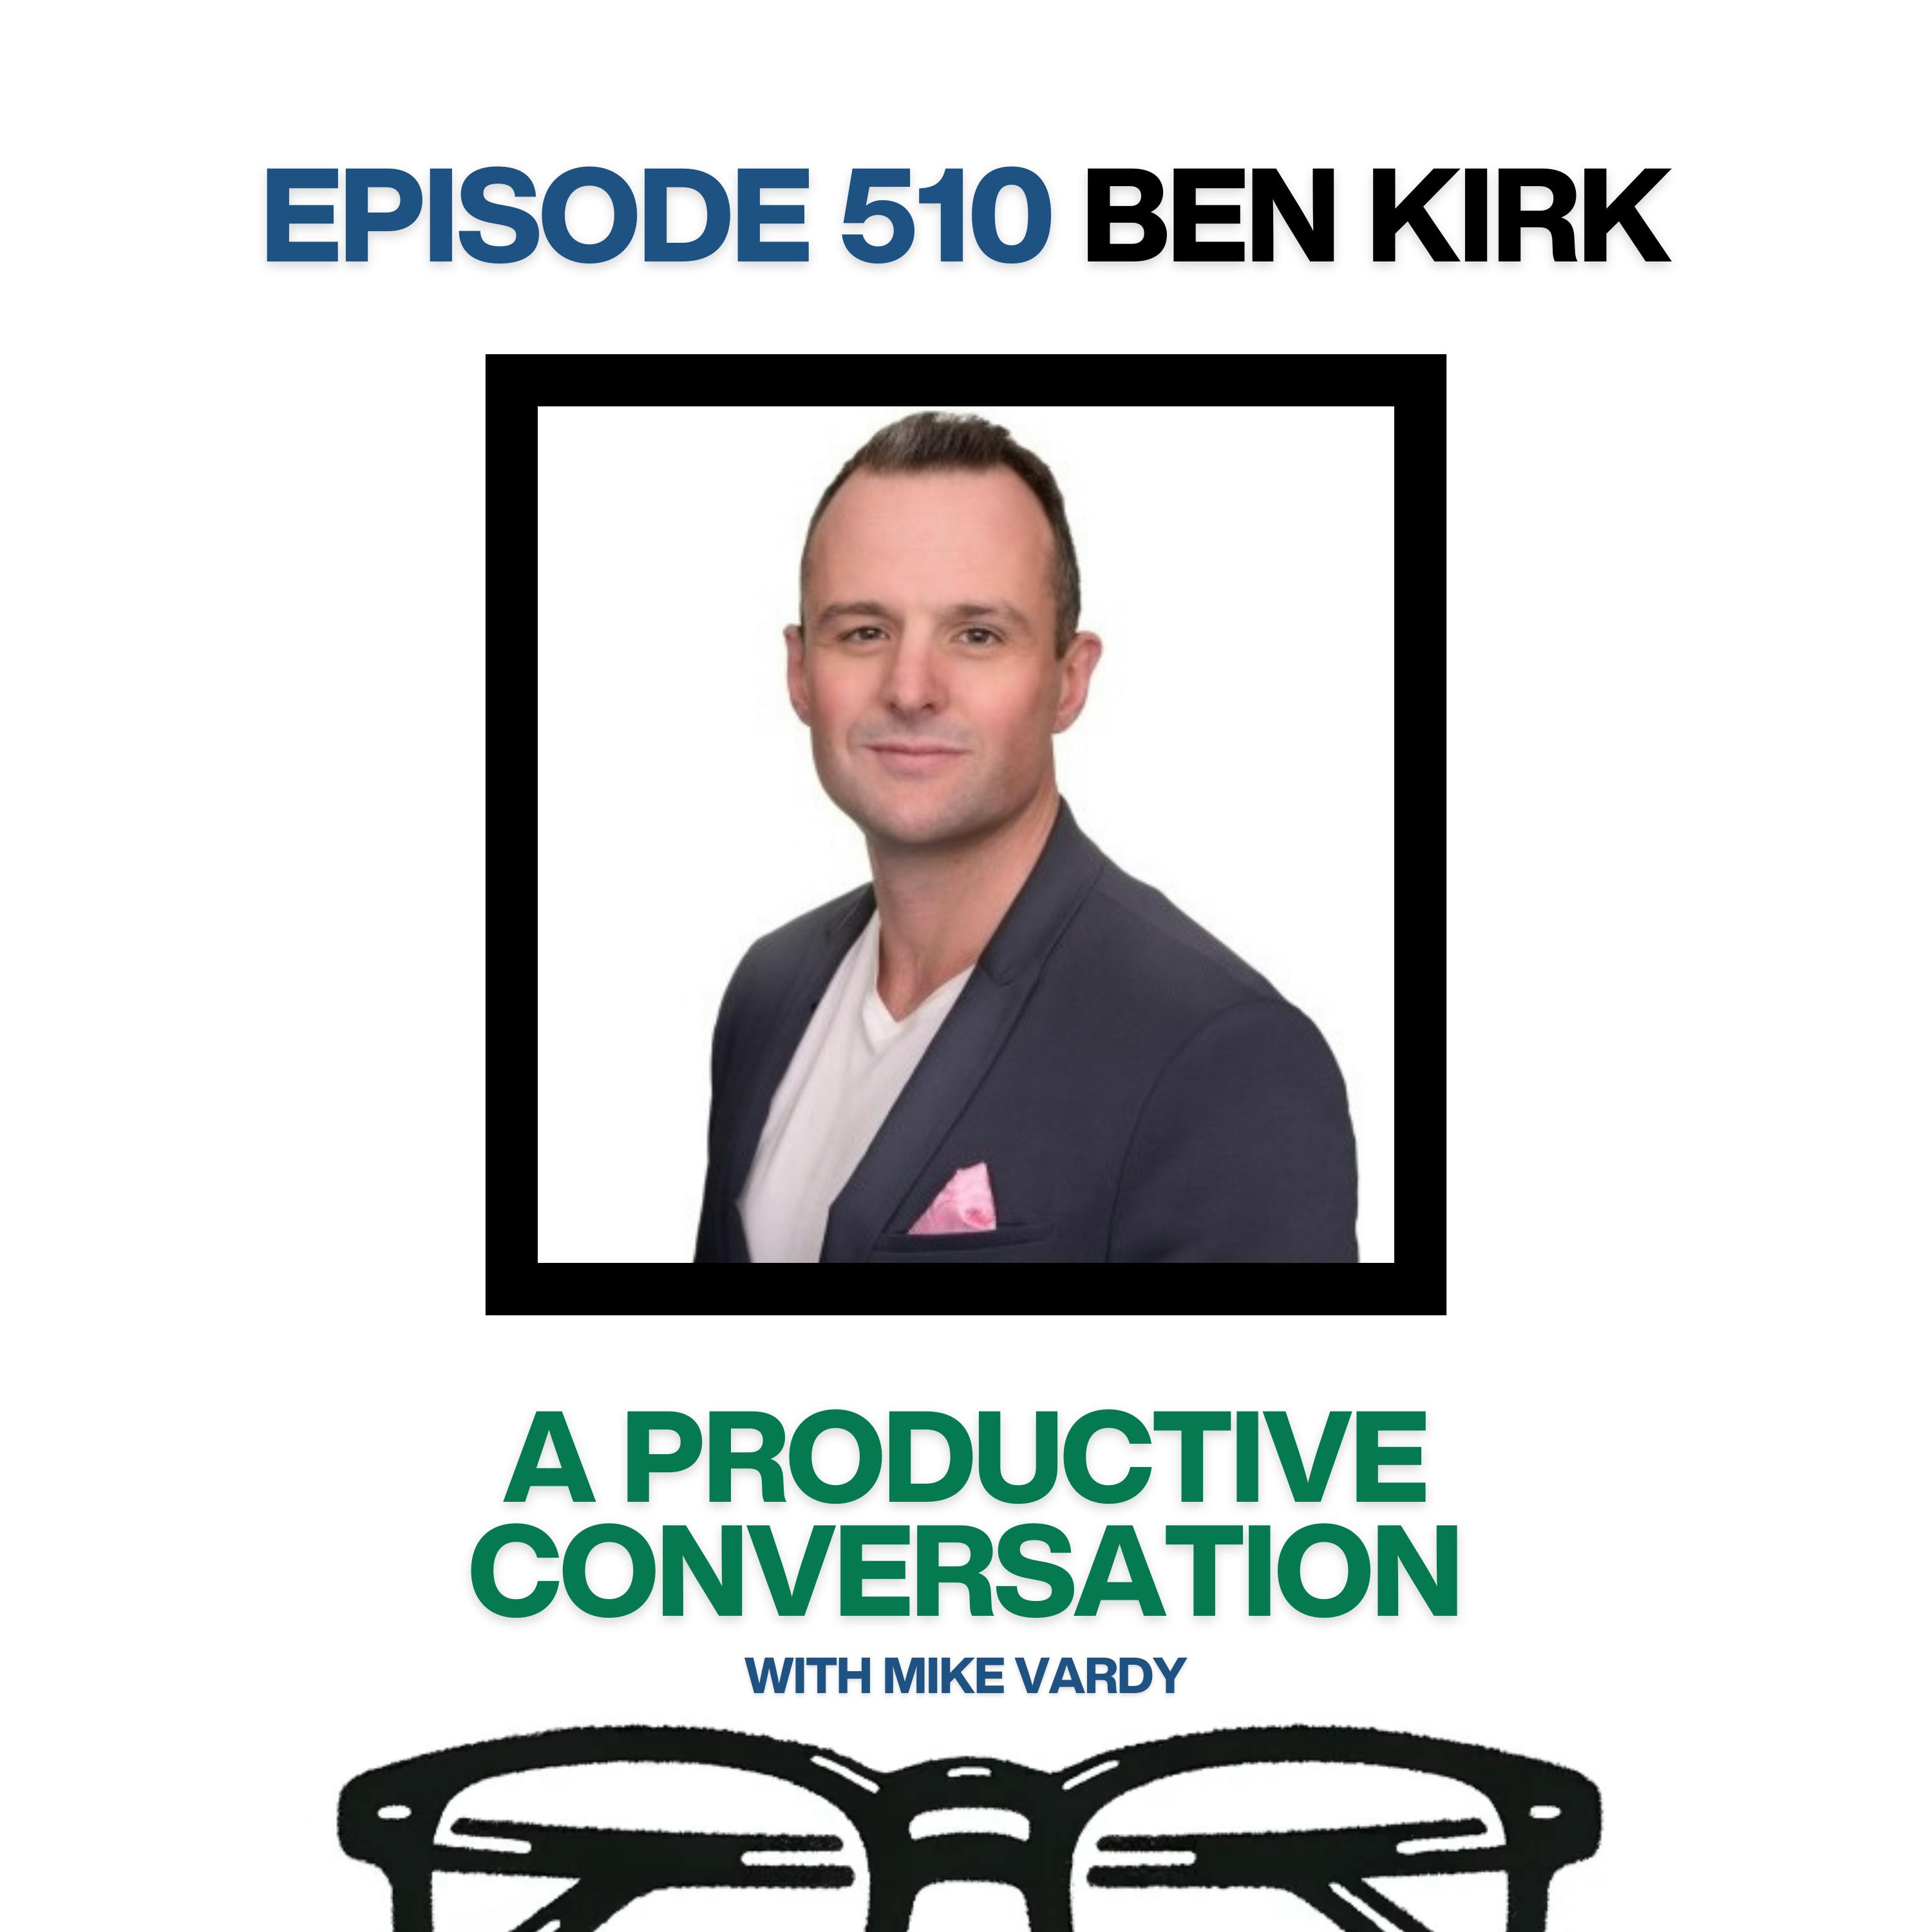 Ben Kirk Talks About Productivity, Routines, and Overcoming Obstacles